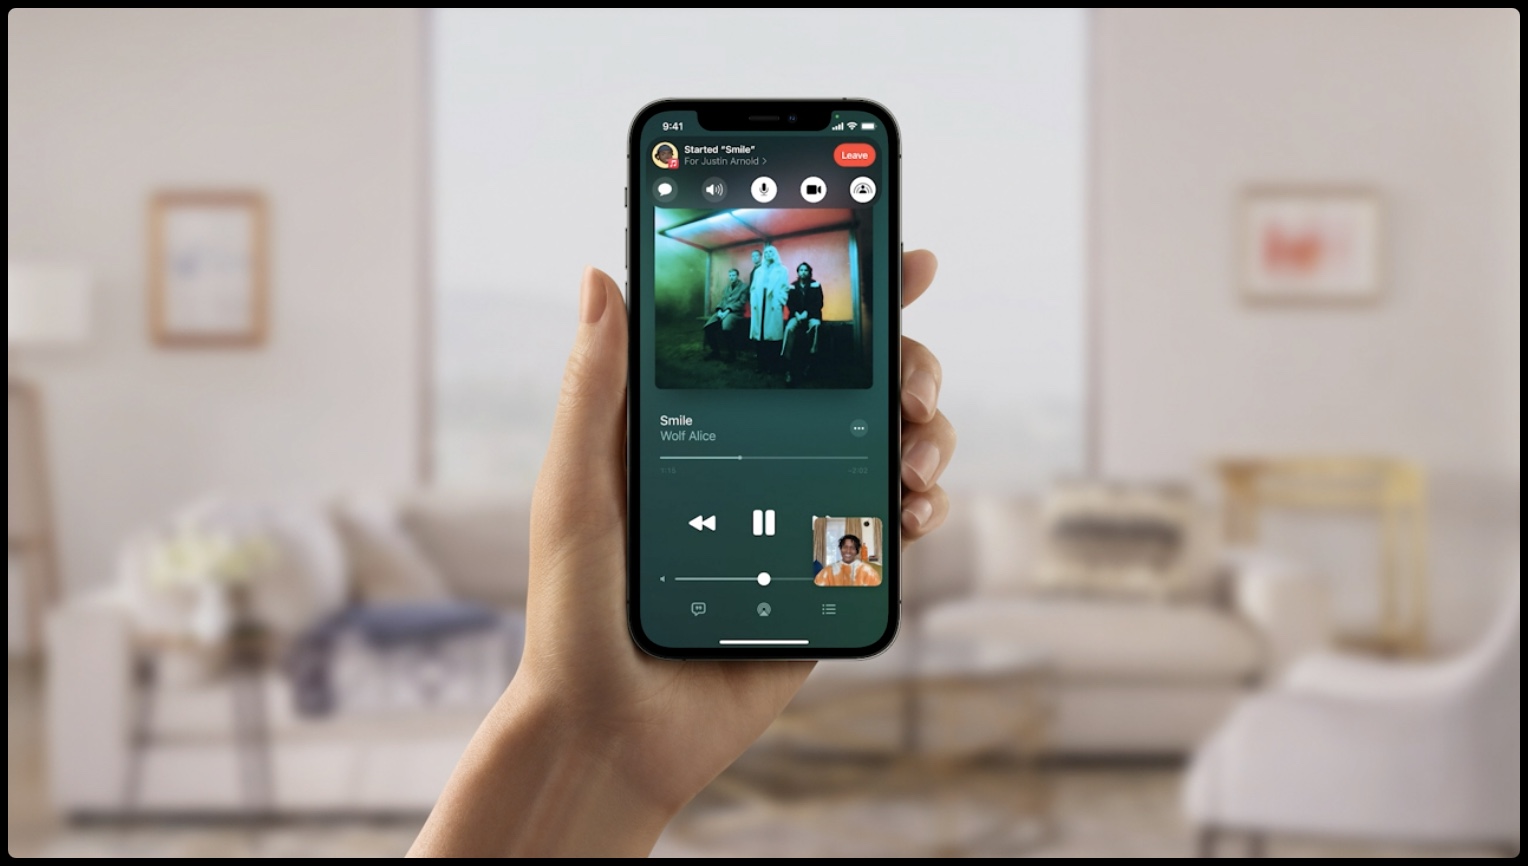 Using SharePlay in FaceTime with Apple Music content on iPhone